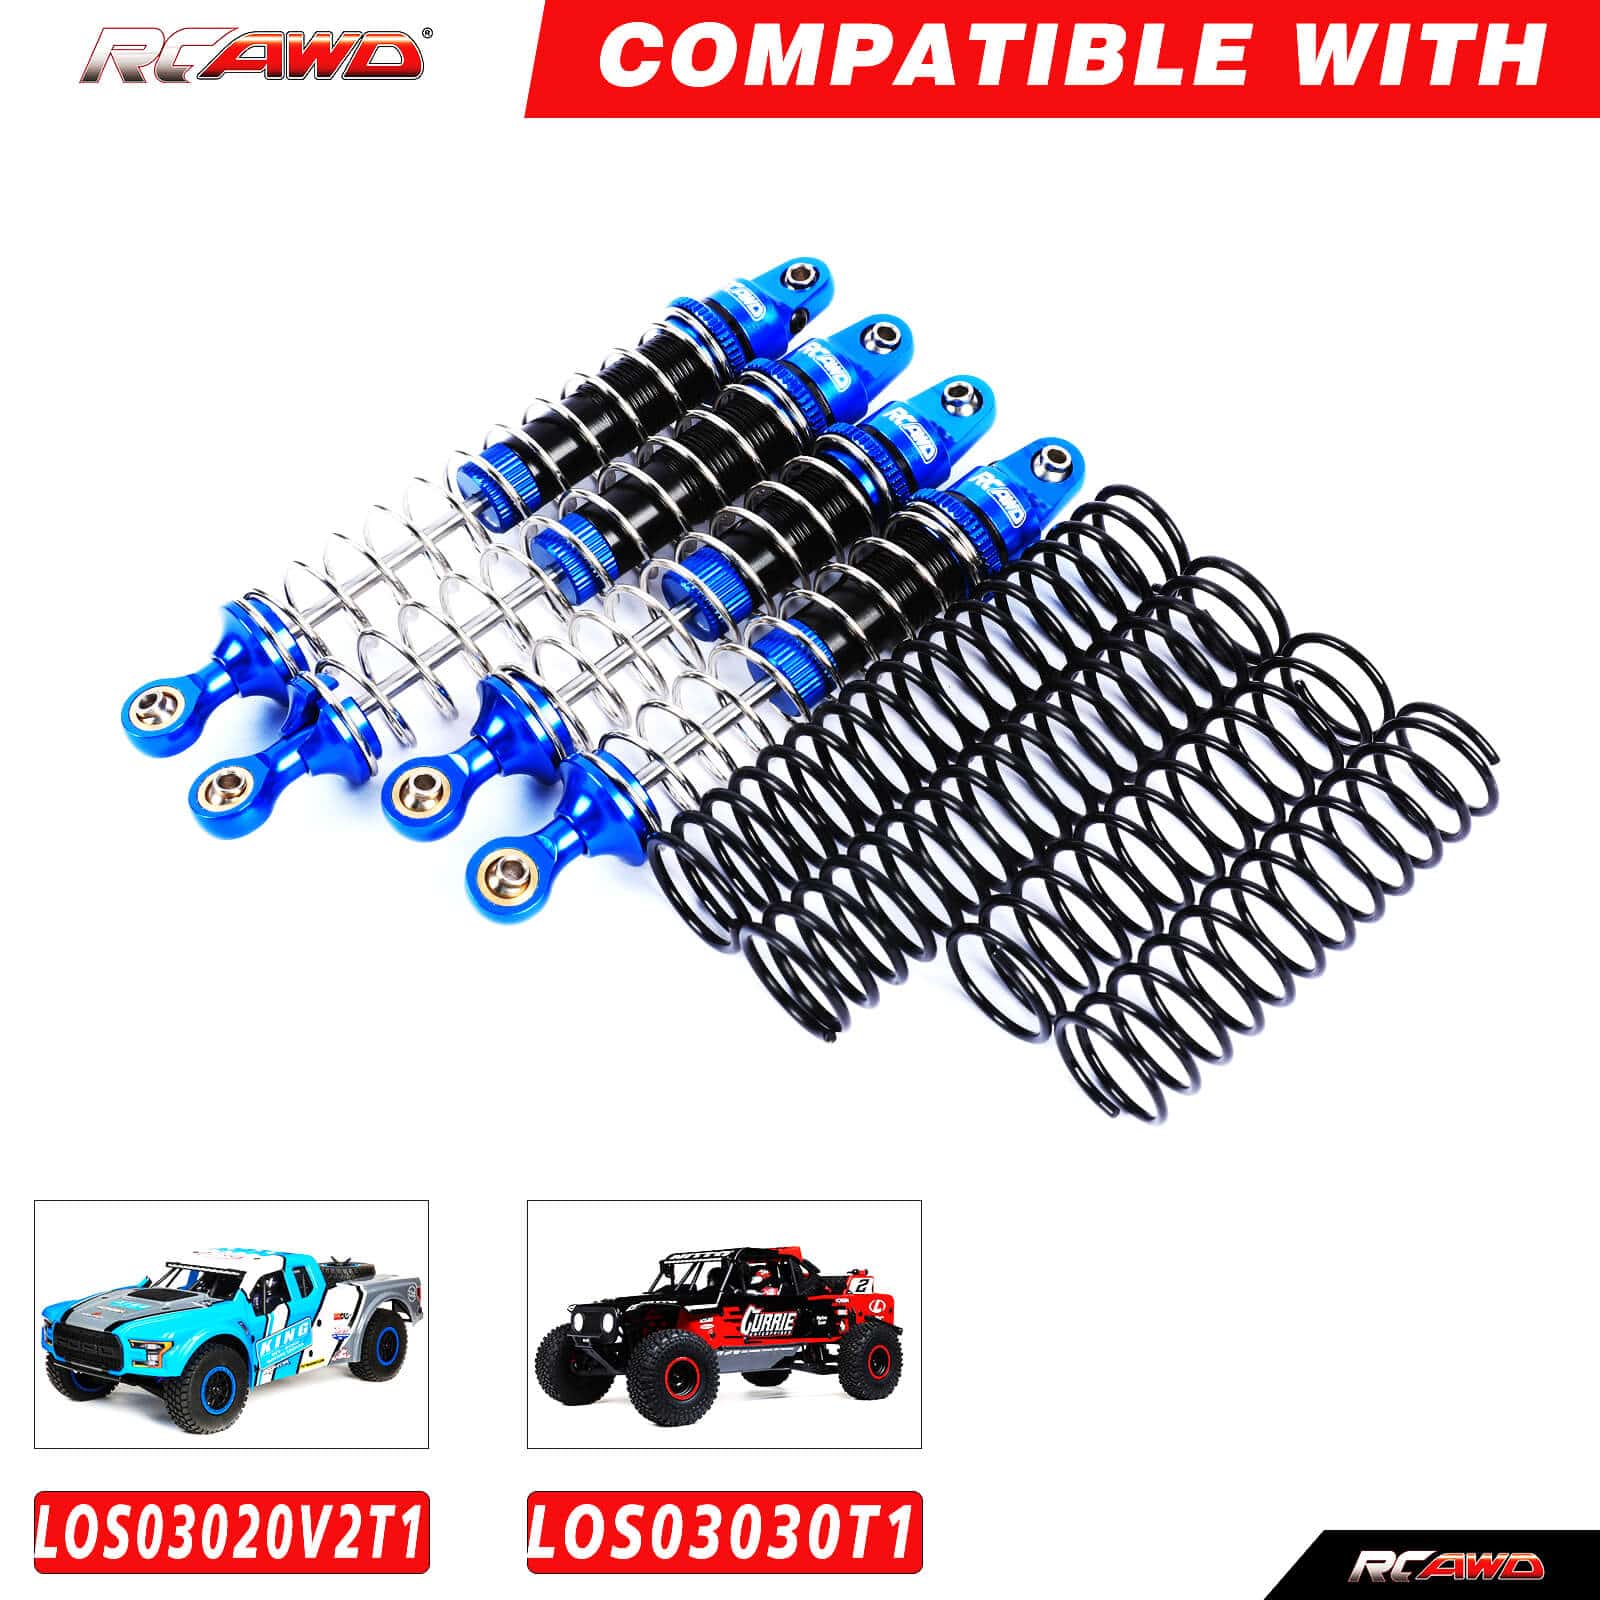 RCAWD LOSI Baja Rey 4WD RCAWD  LOSI Baja Rey 4WD Upgrades front and rear shock for LOS03009